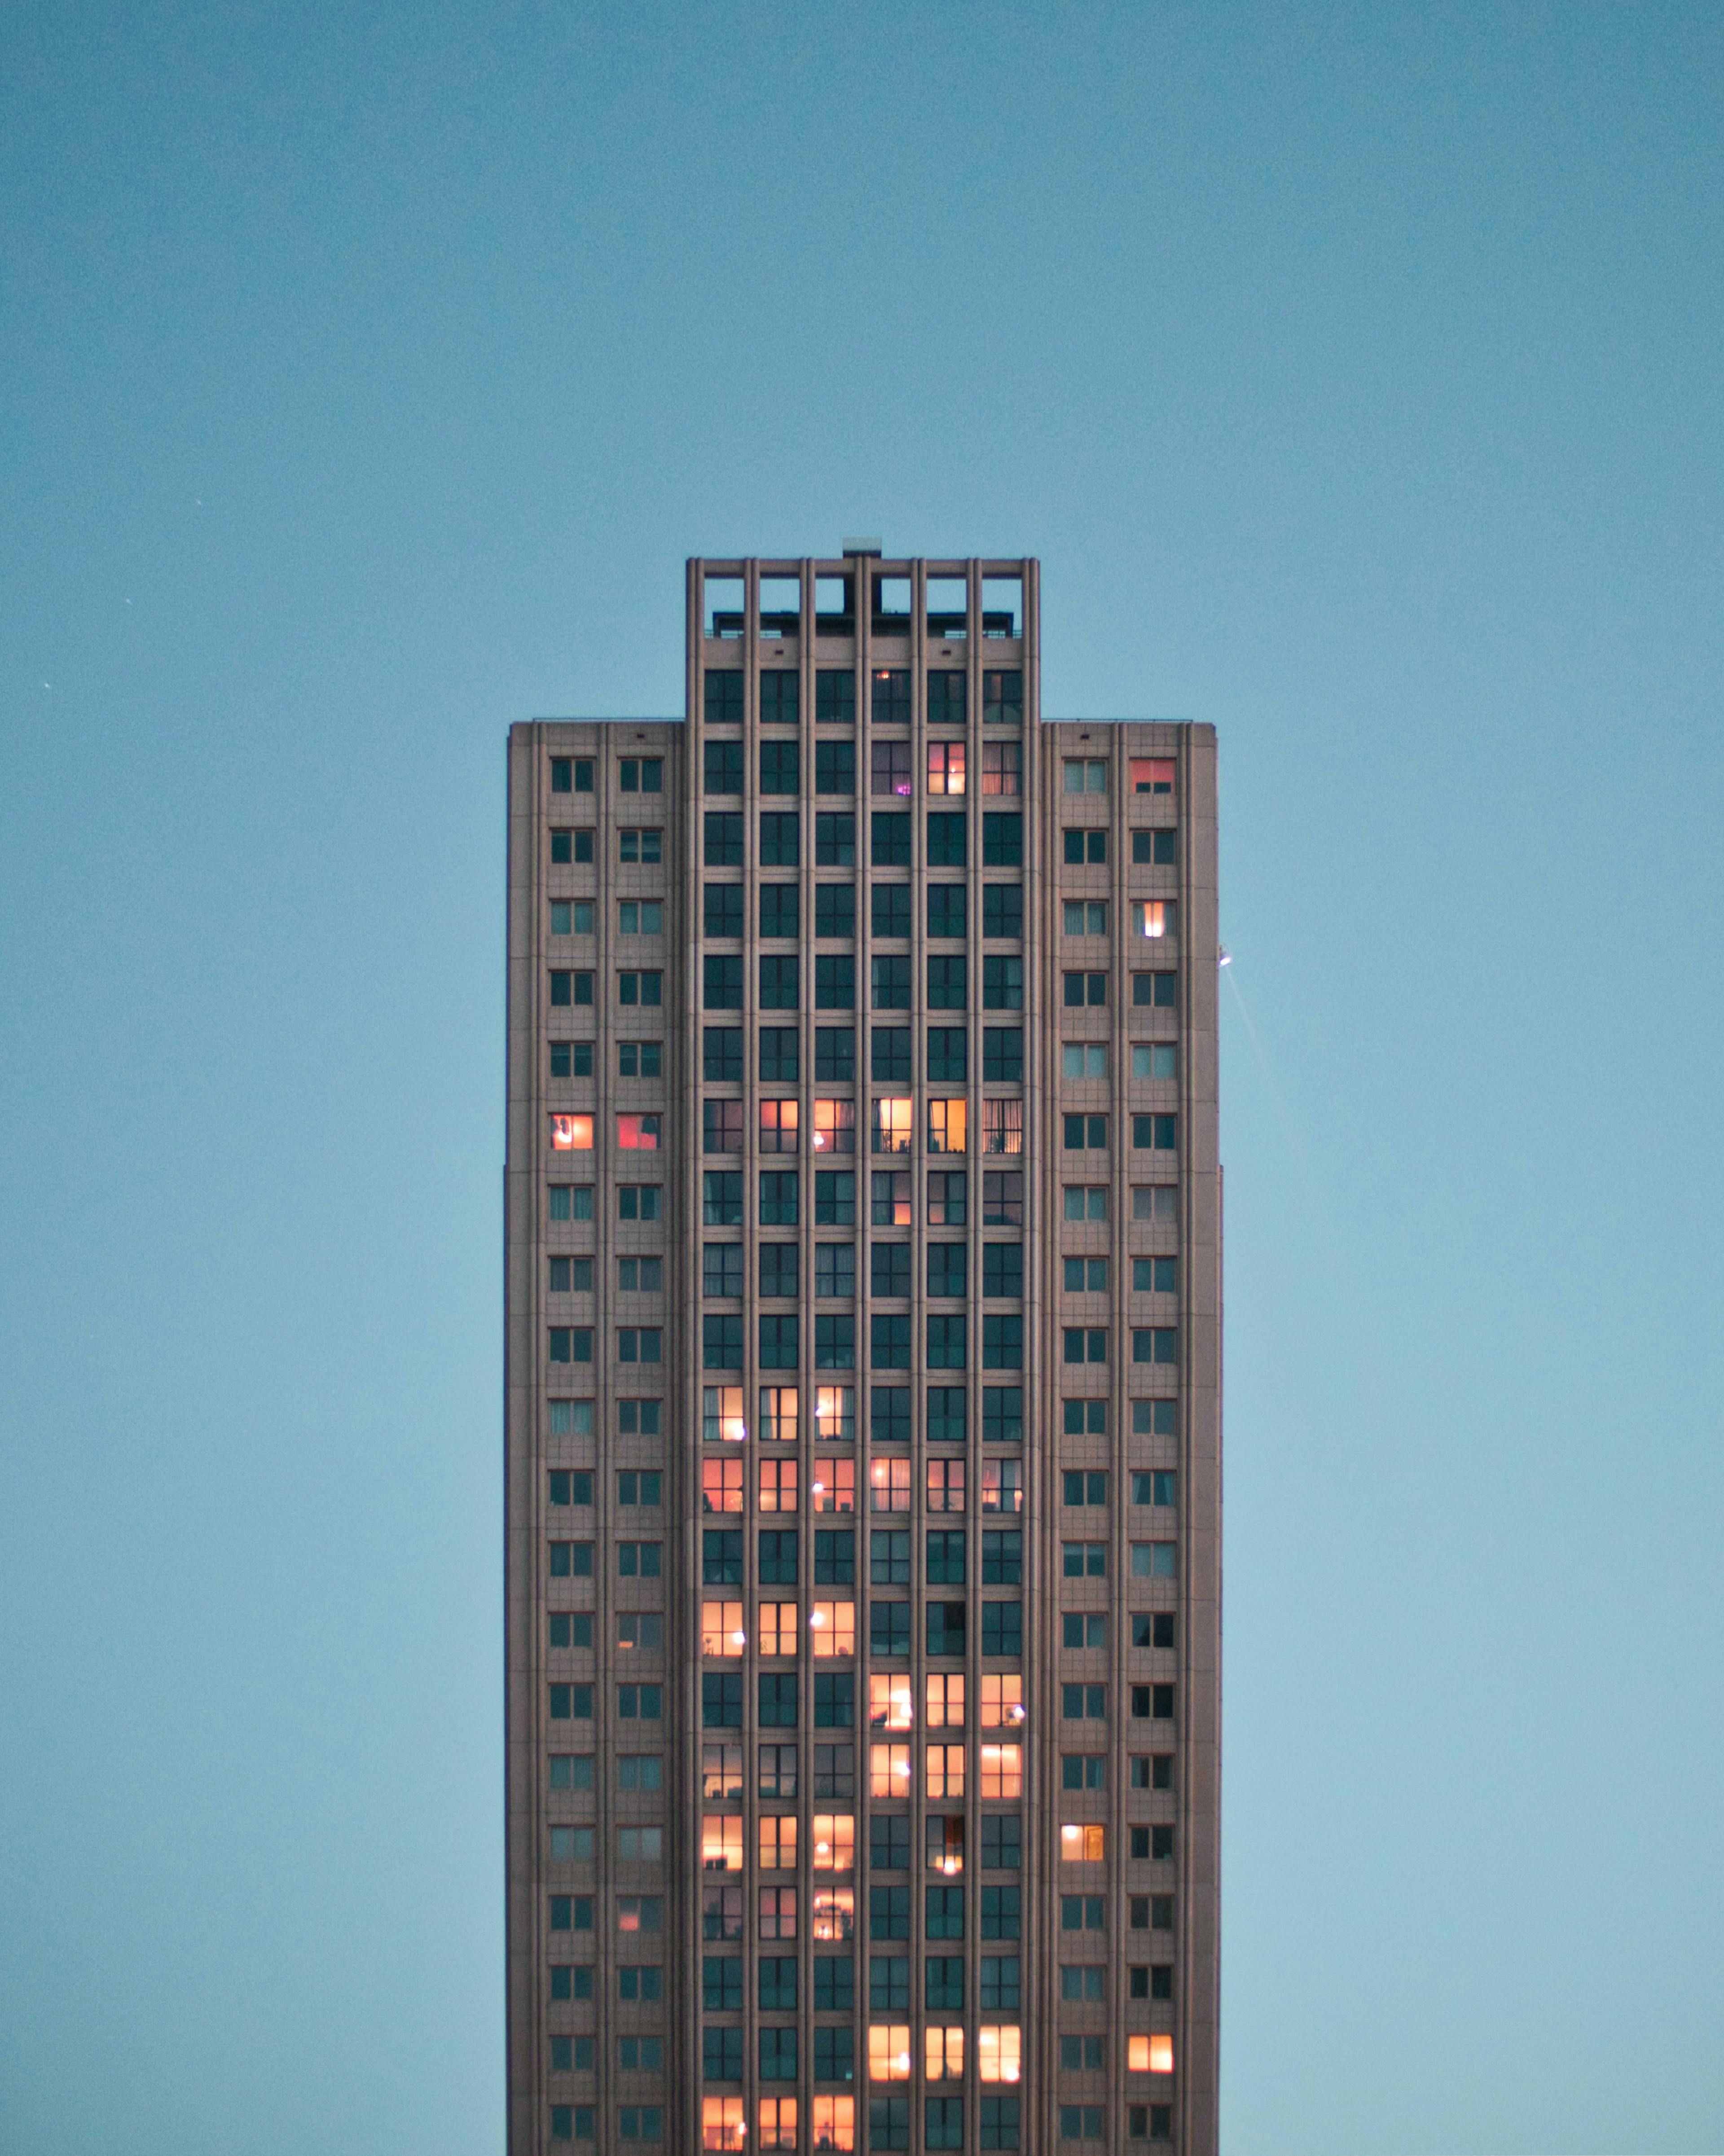 A building in Rotterdam, the Netherlands